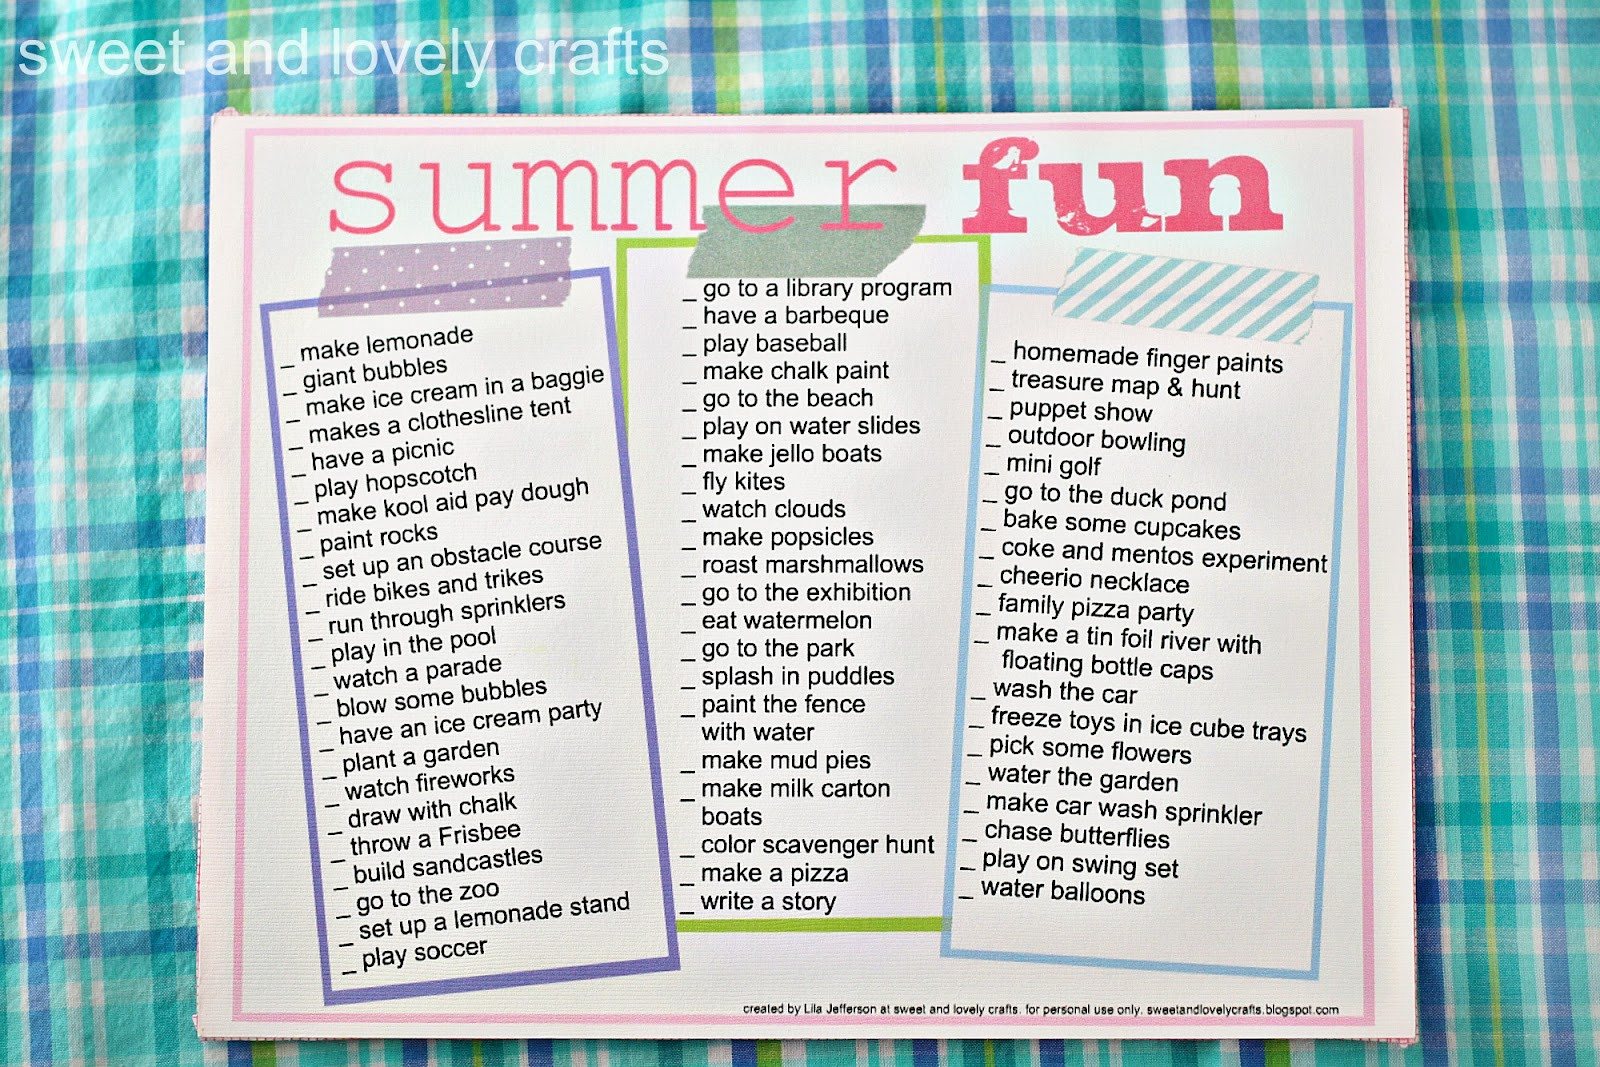 Fun Summer Ideas
 sweet and lovely crafts summer fun printable